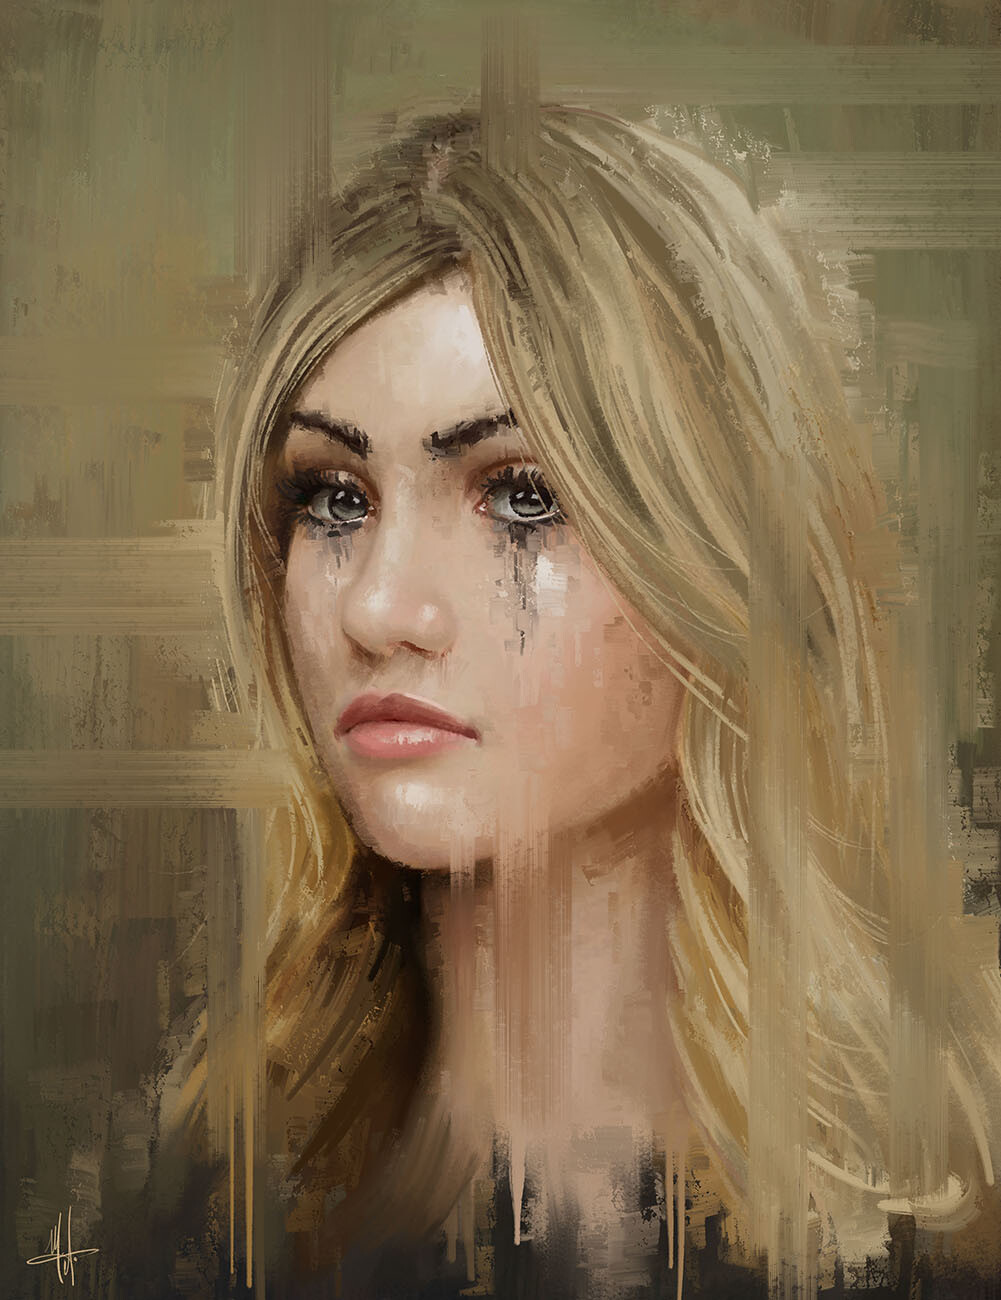 Digital Portrait Painting - Painterly Oily Style